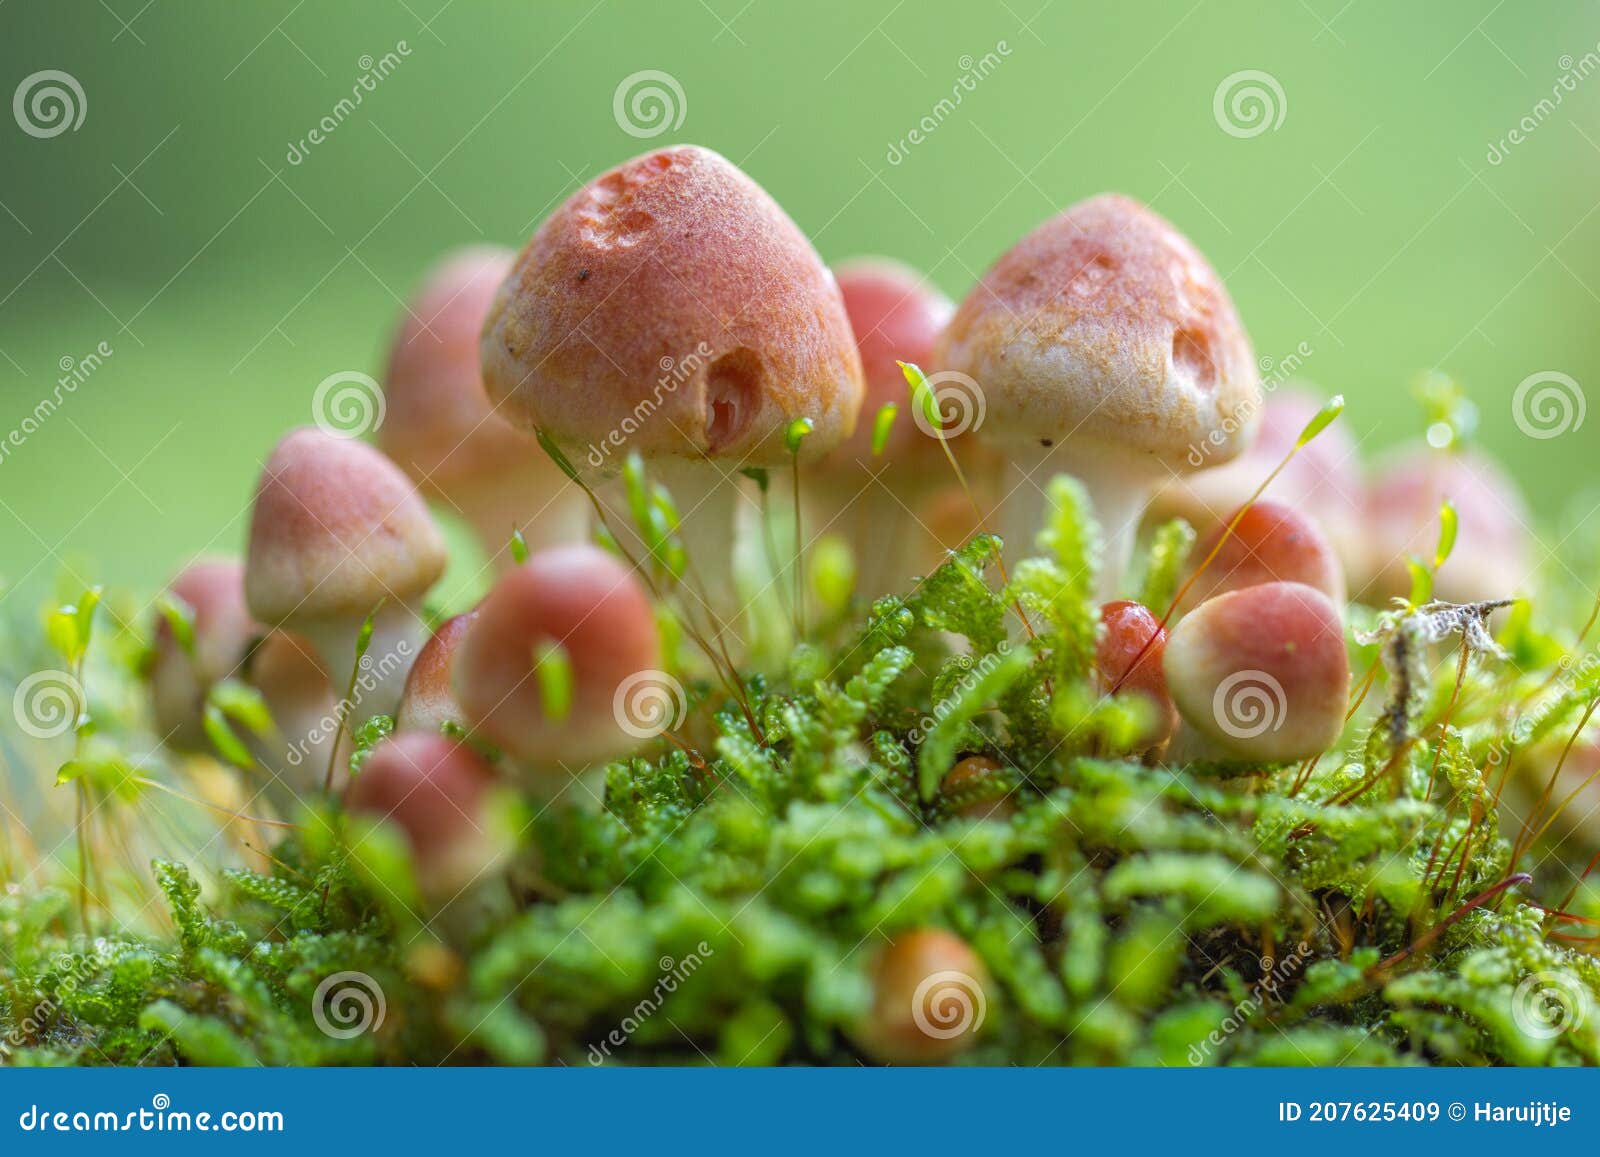 a group of mushrooms in a fairytail setting